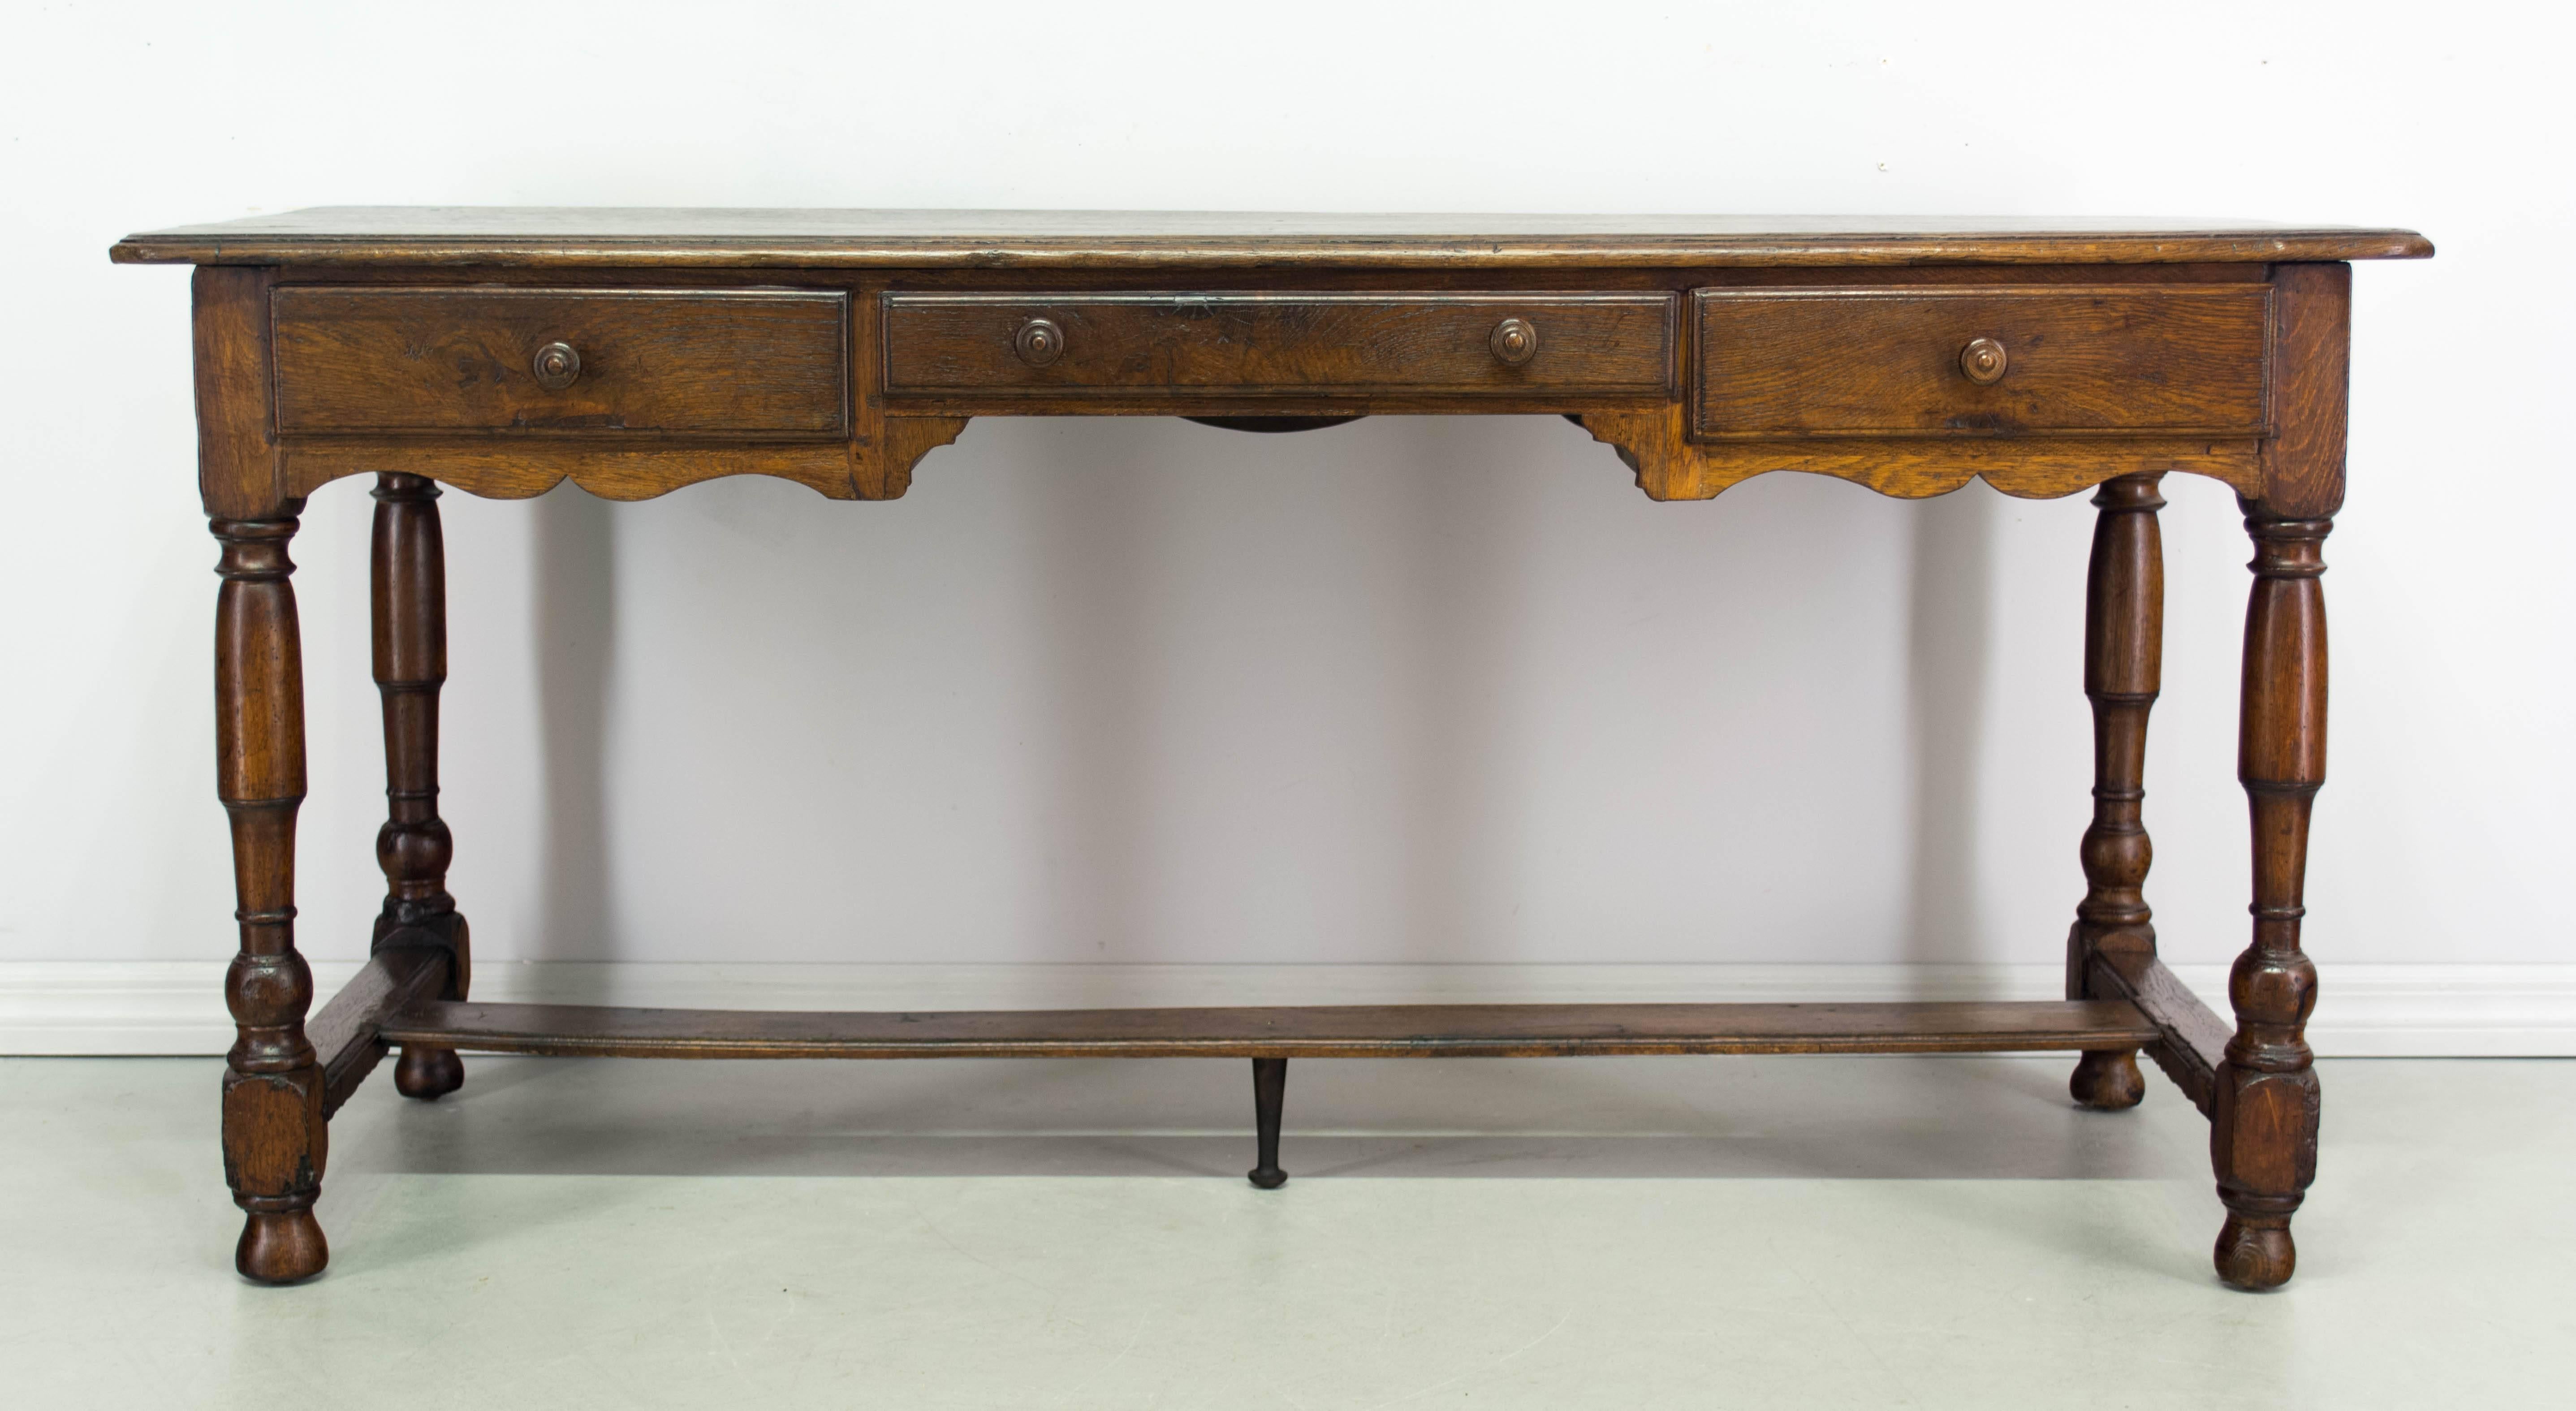 19th century country French bureau plat, or desk made of solid oak with three dovetailed drawers and great writing surface. A sturdy table with turned wood legs and stretcher. Scalloped apron on all four side. A nice size for use as a console,